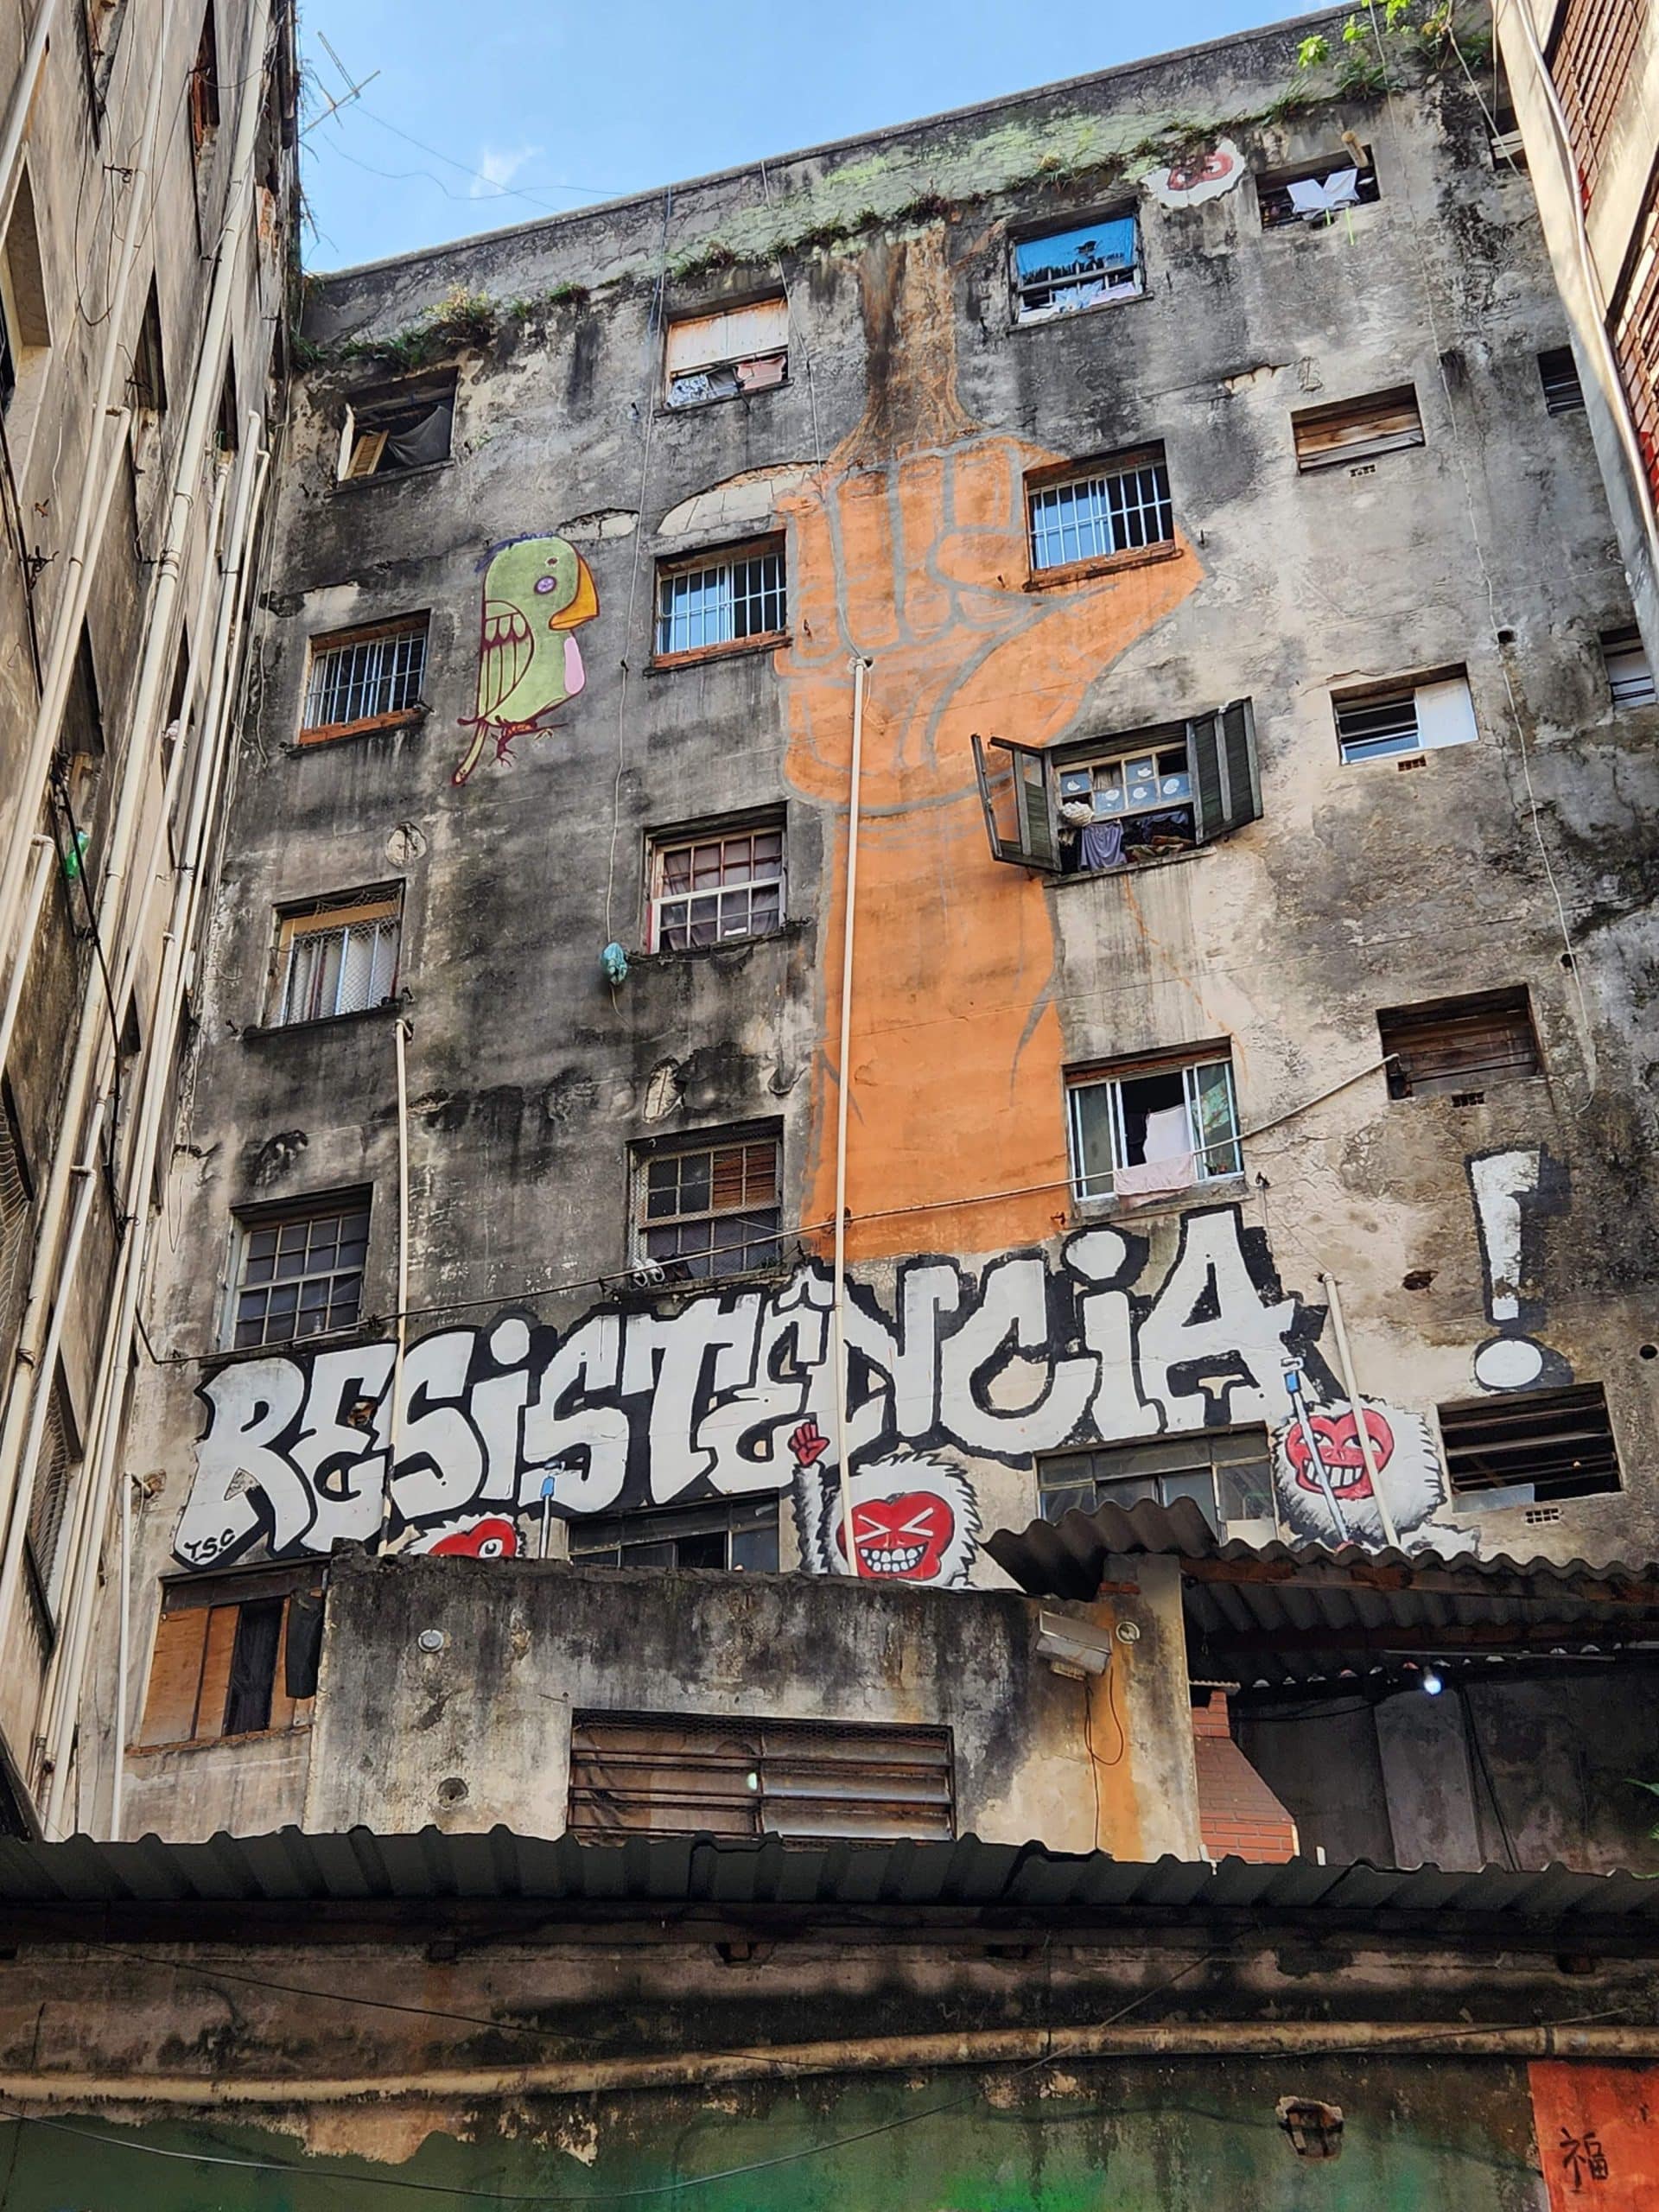 The exterior of a building, with lettering that reads "Resistencia" with a mural of a fist extending upward.